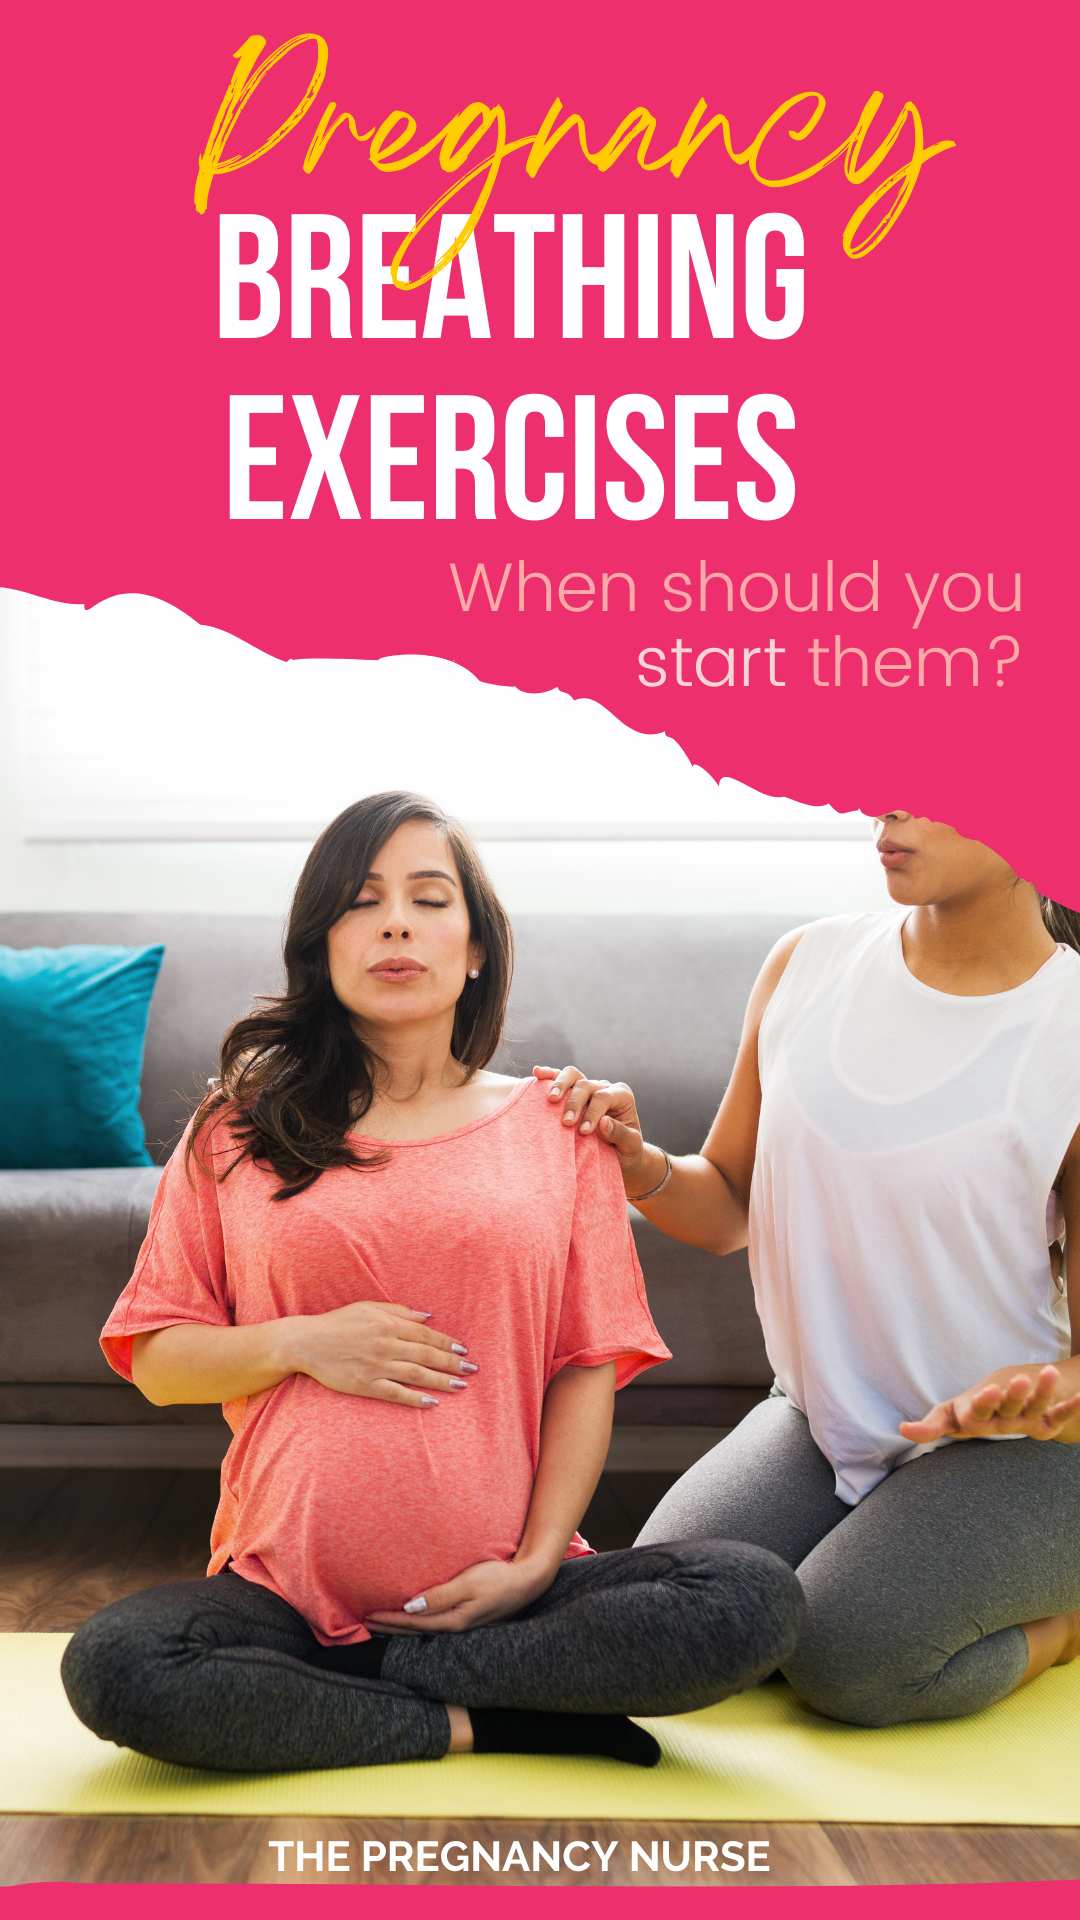 Breathing exercises are a great way to prepare your body for labor and delivery. But when is the best time to start practicing them? Keep reading for tips on when to start and how breathing exercises can help make your pregnancy and birth experience smoother.